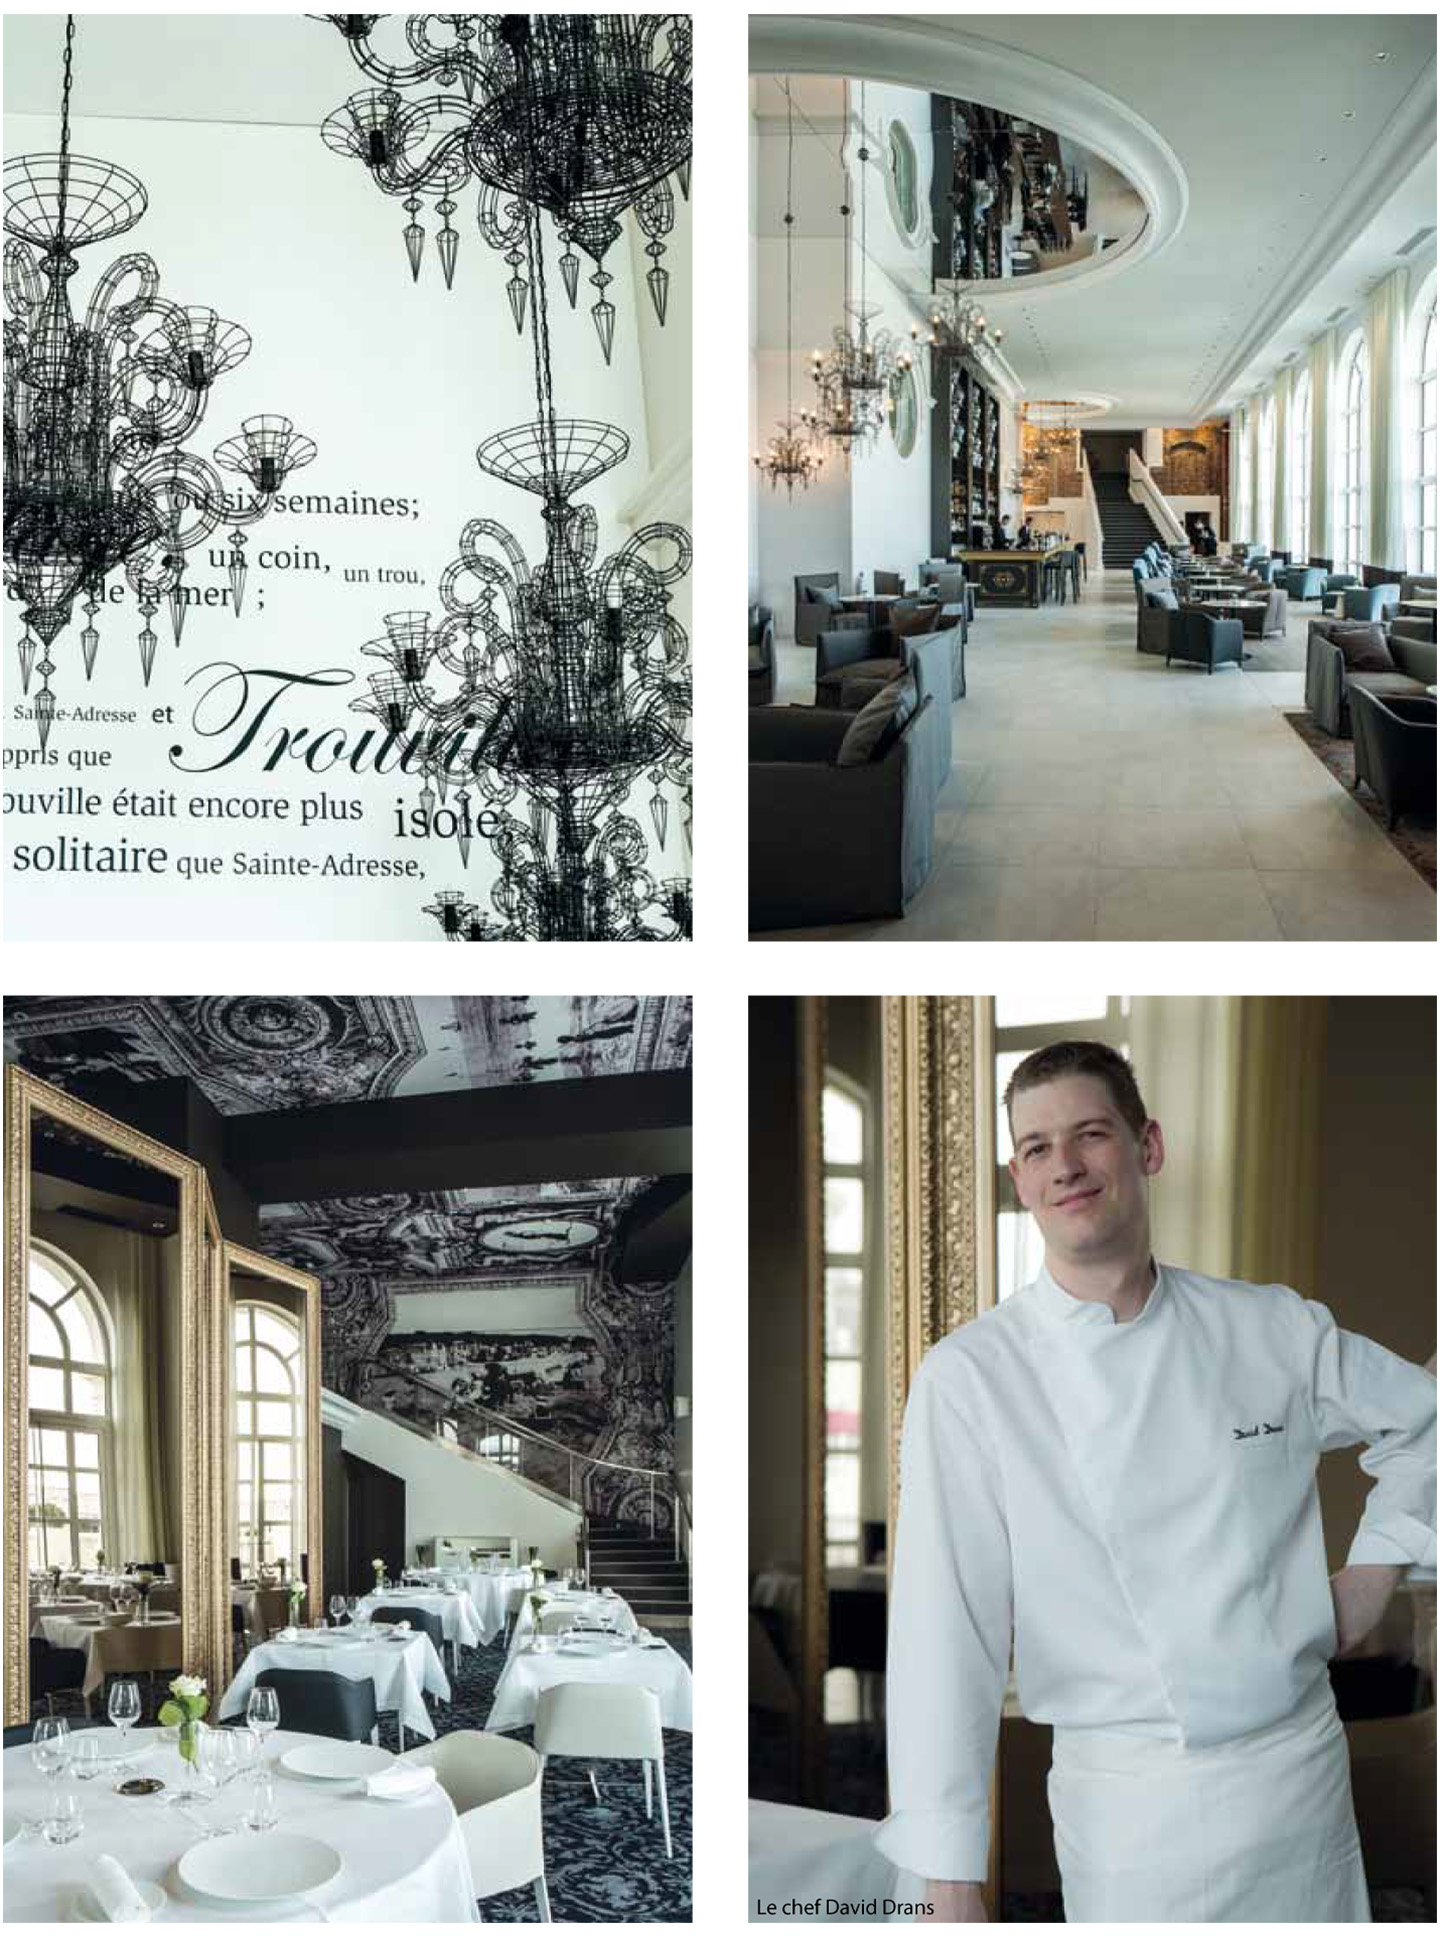 article on the marine cures of trouville in the magazine voyage de luxe, 5 star luxury hotel thalasso and spa by the interior design studio jean-philippe nuel